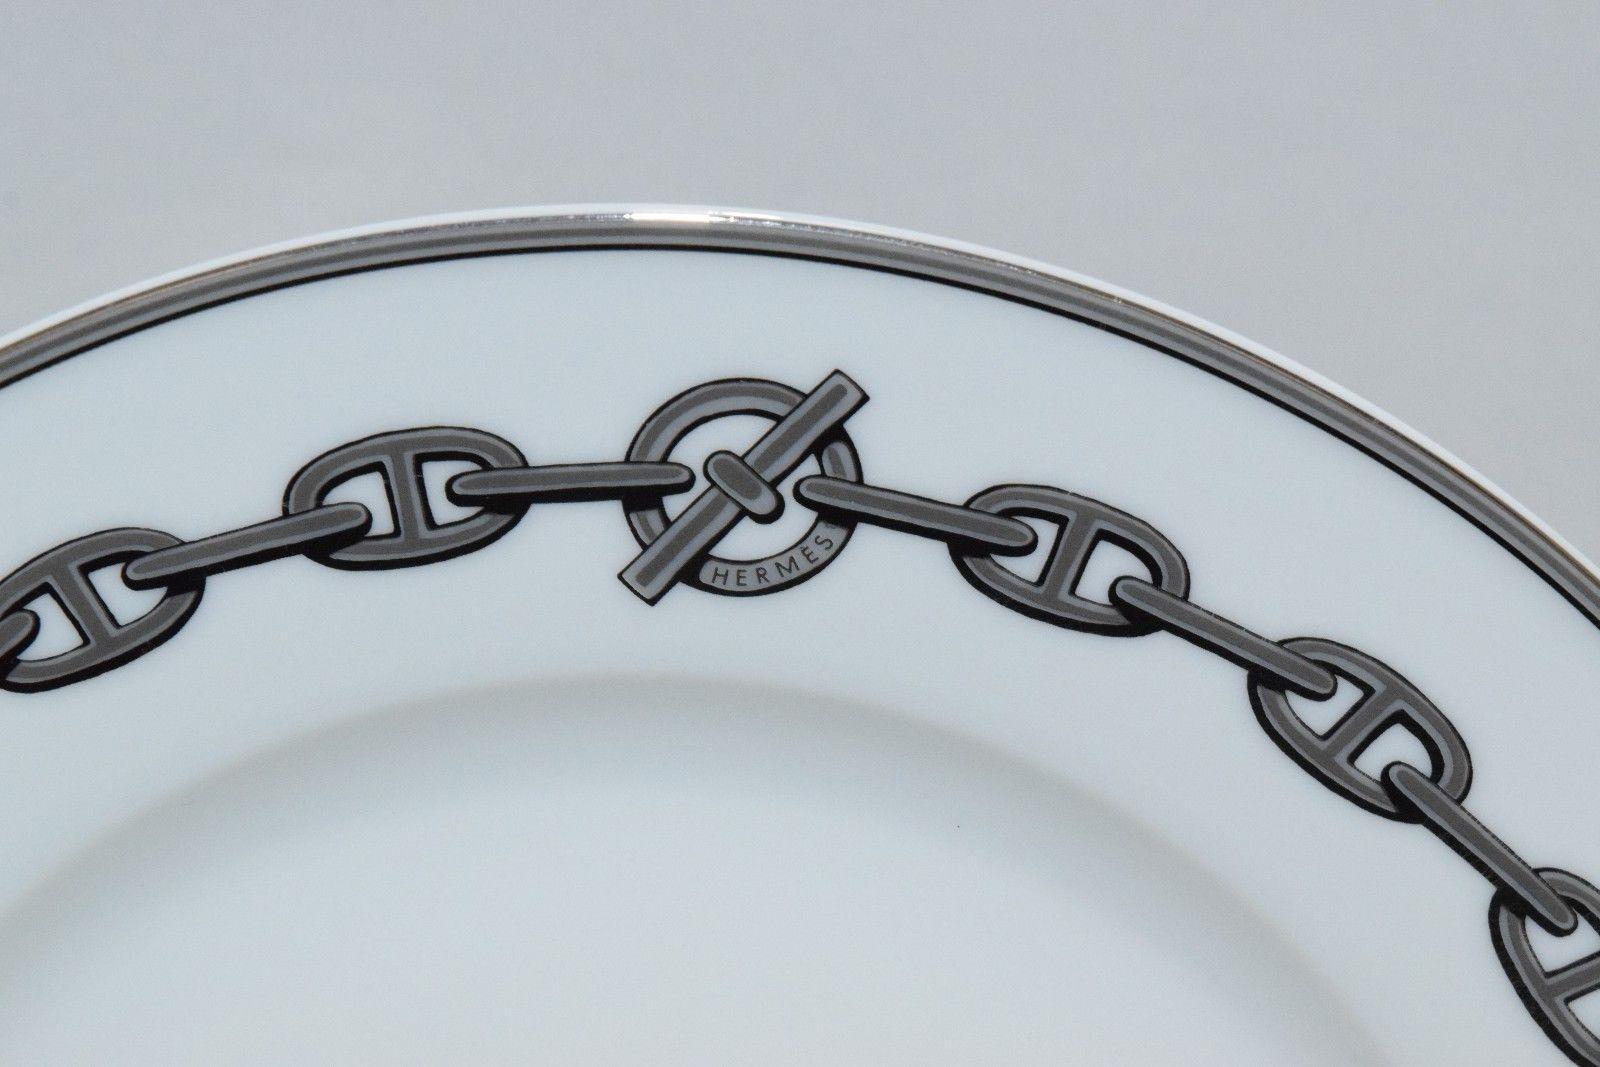 A set of 8 (eight) place settings in the Chaine D'Ancre pattern in gray by Hermes. Porcelain. Signed. Made in France; produced from 1997-2017.

One of Hermes' most coveted patterns. Featuring the signature chain link border against pristine